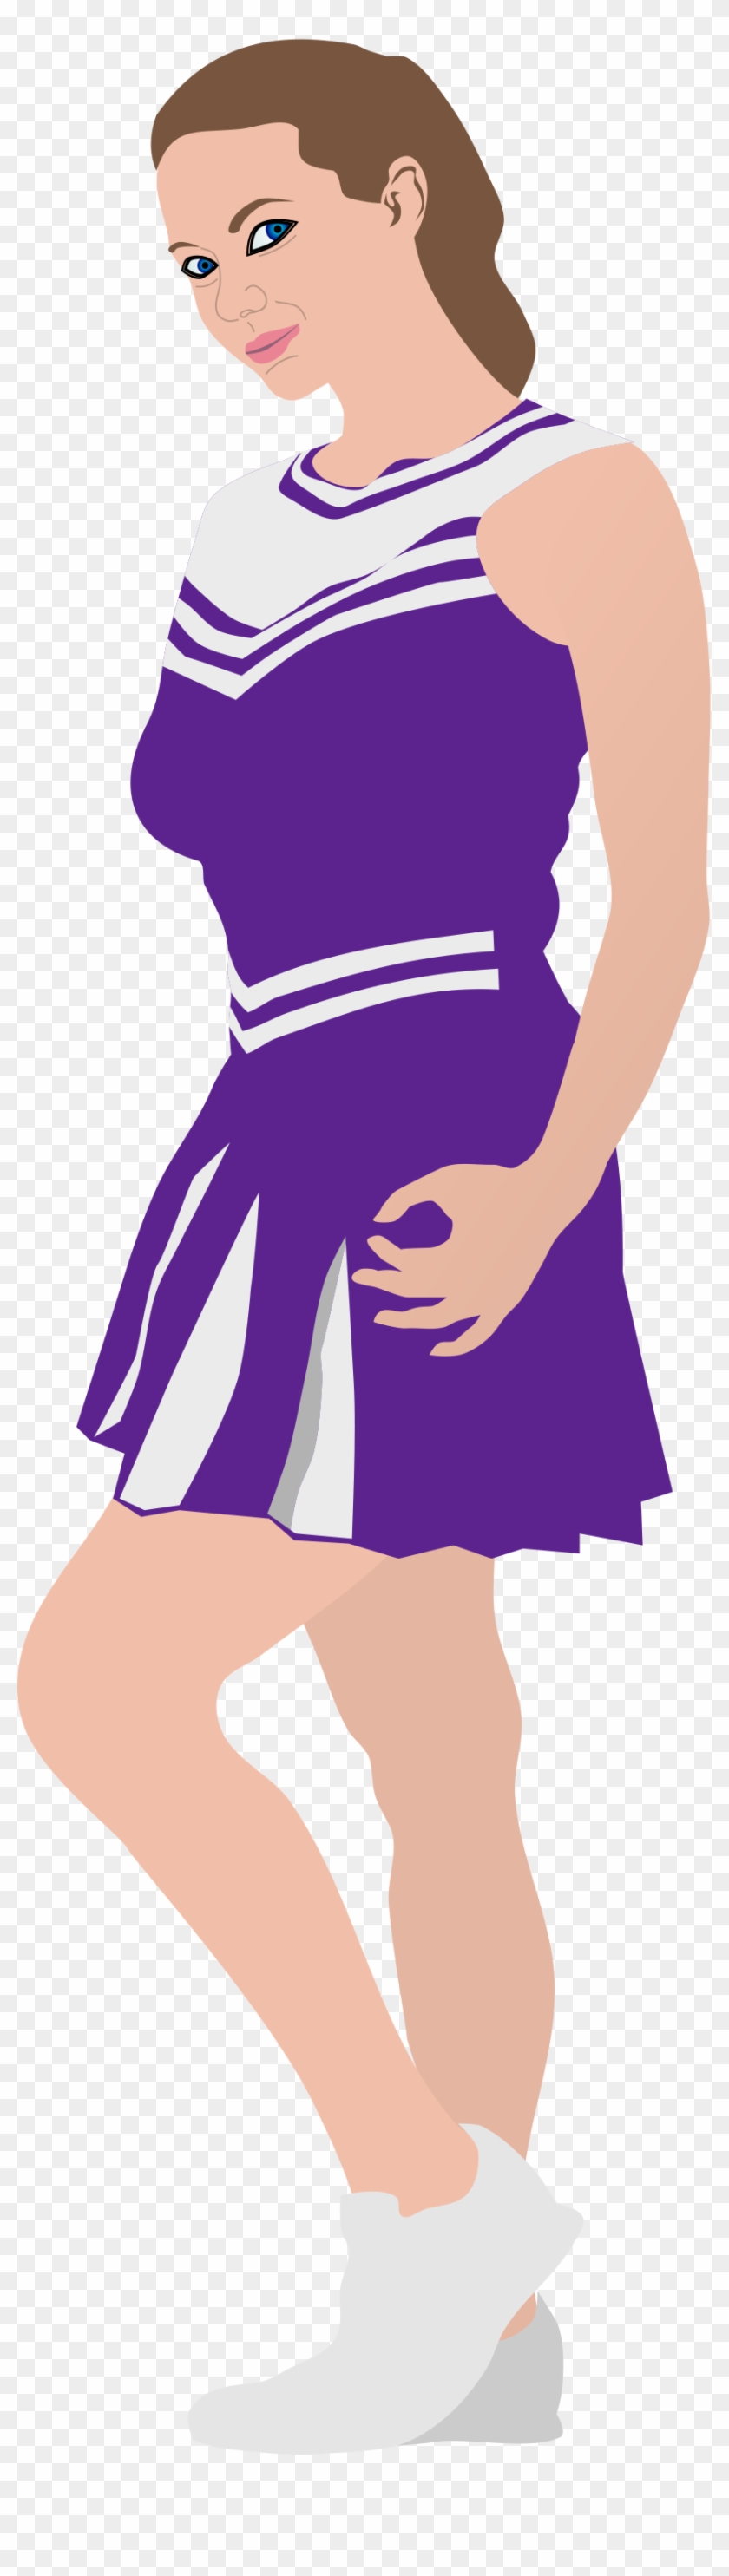 Similar Images For Cheerleader Clip Art - Cheerleading Clipart Transparent Background #942138